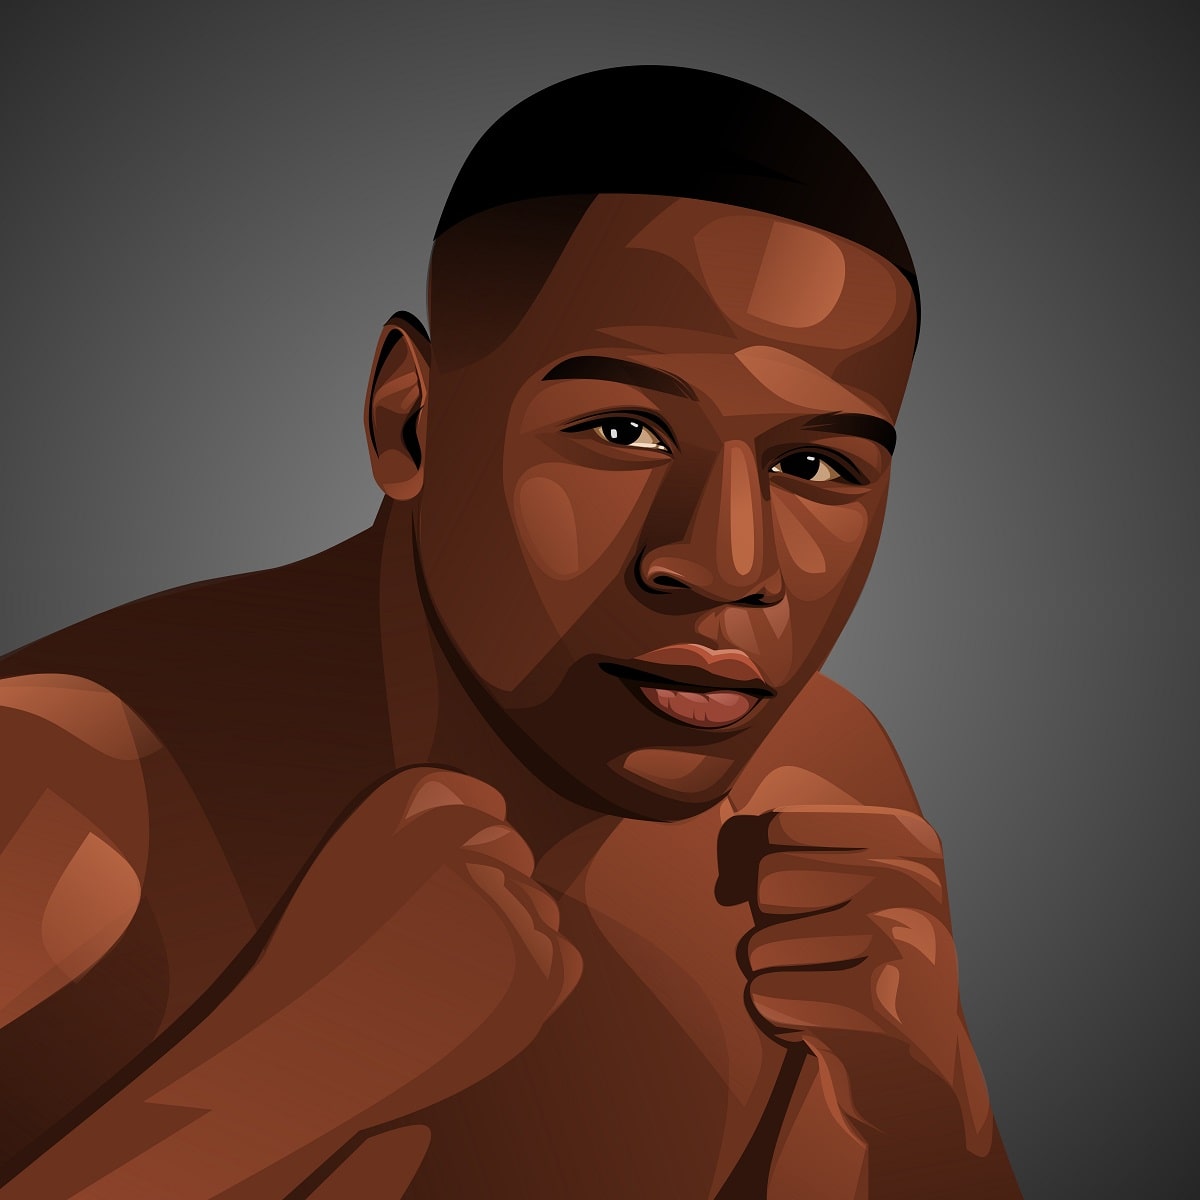 floyd mayweather © Inspirationfeed. All rights reserved.